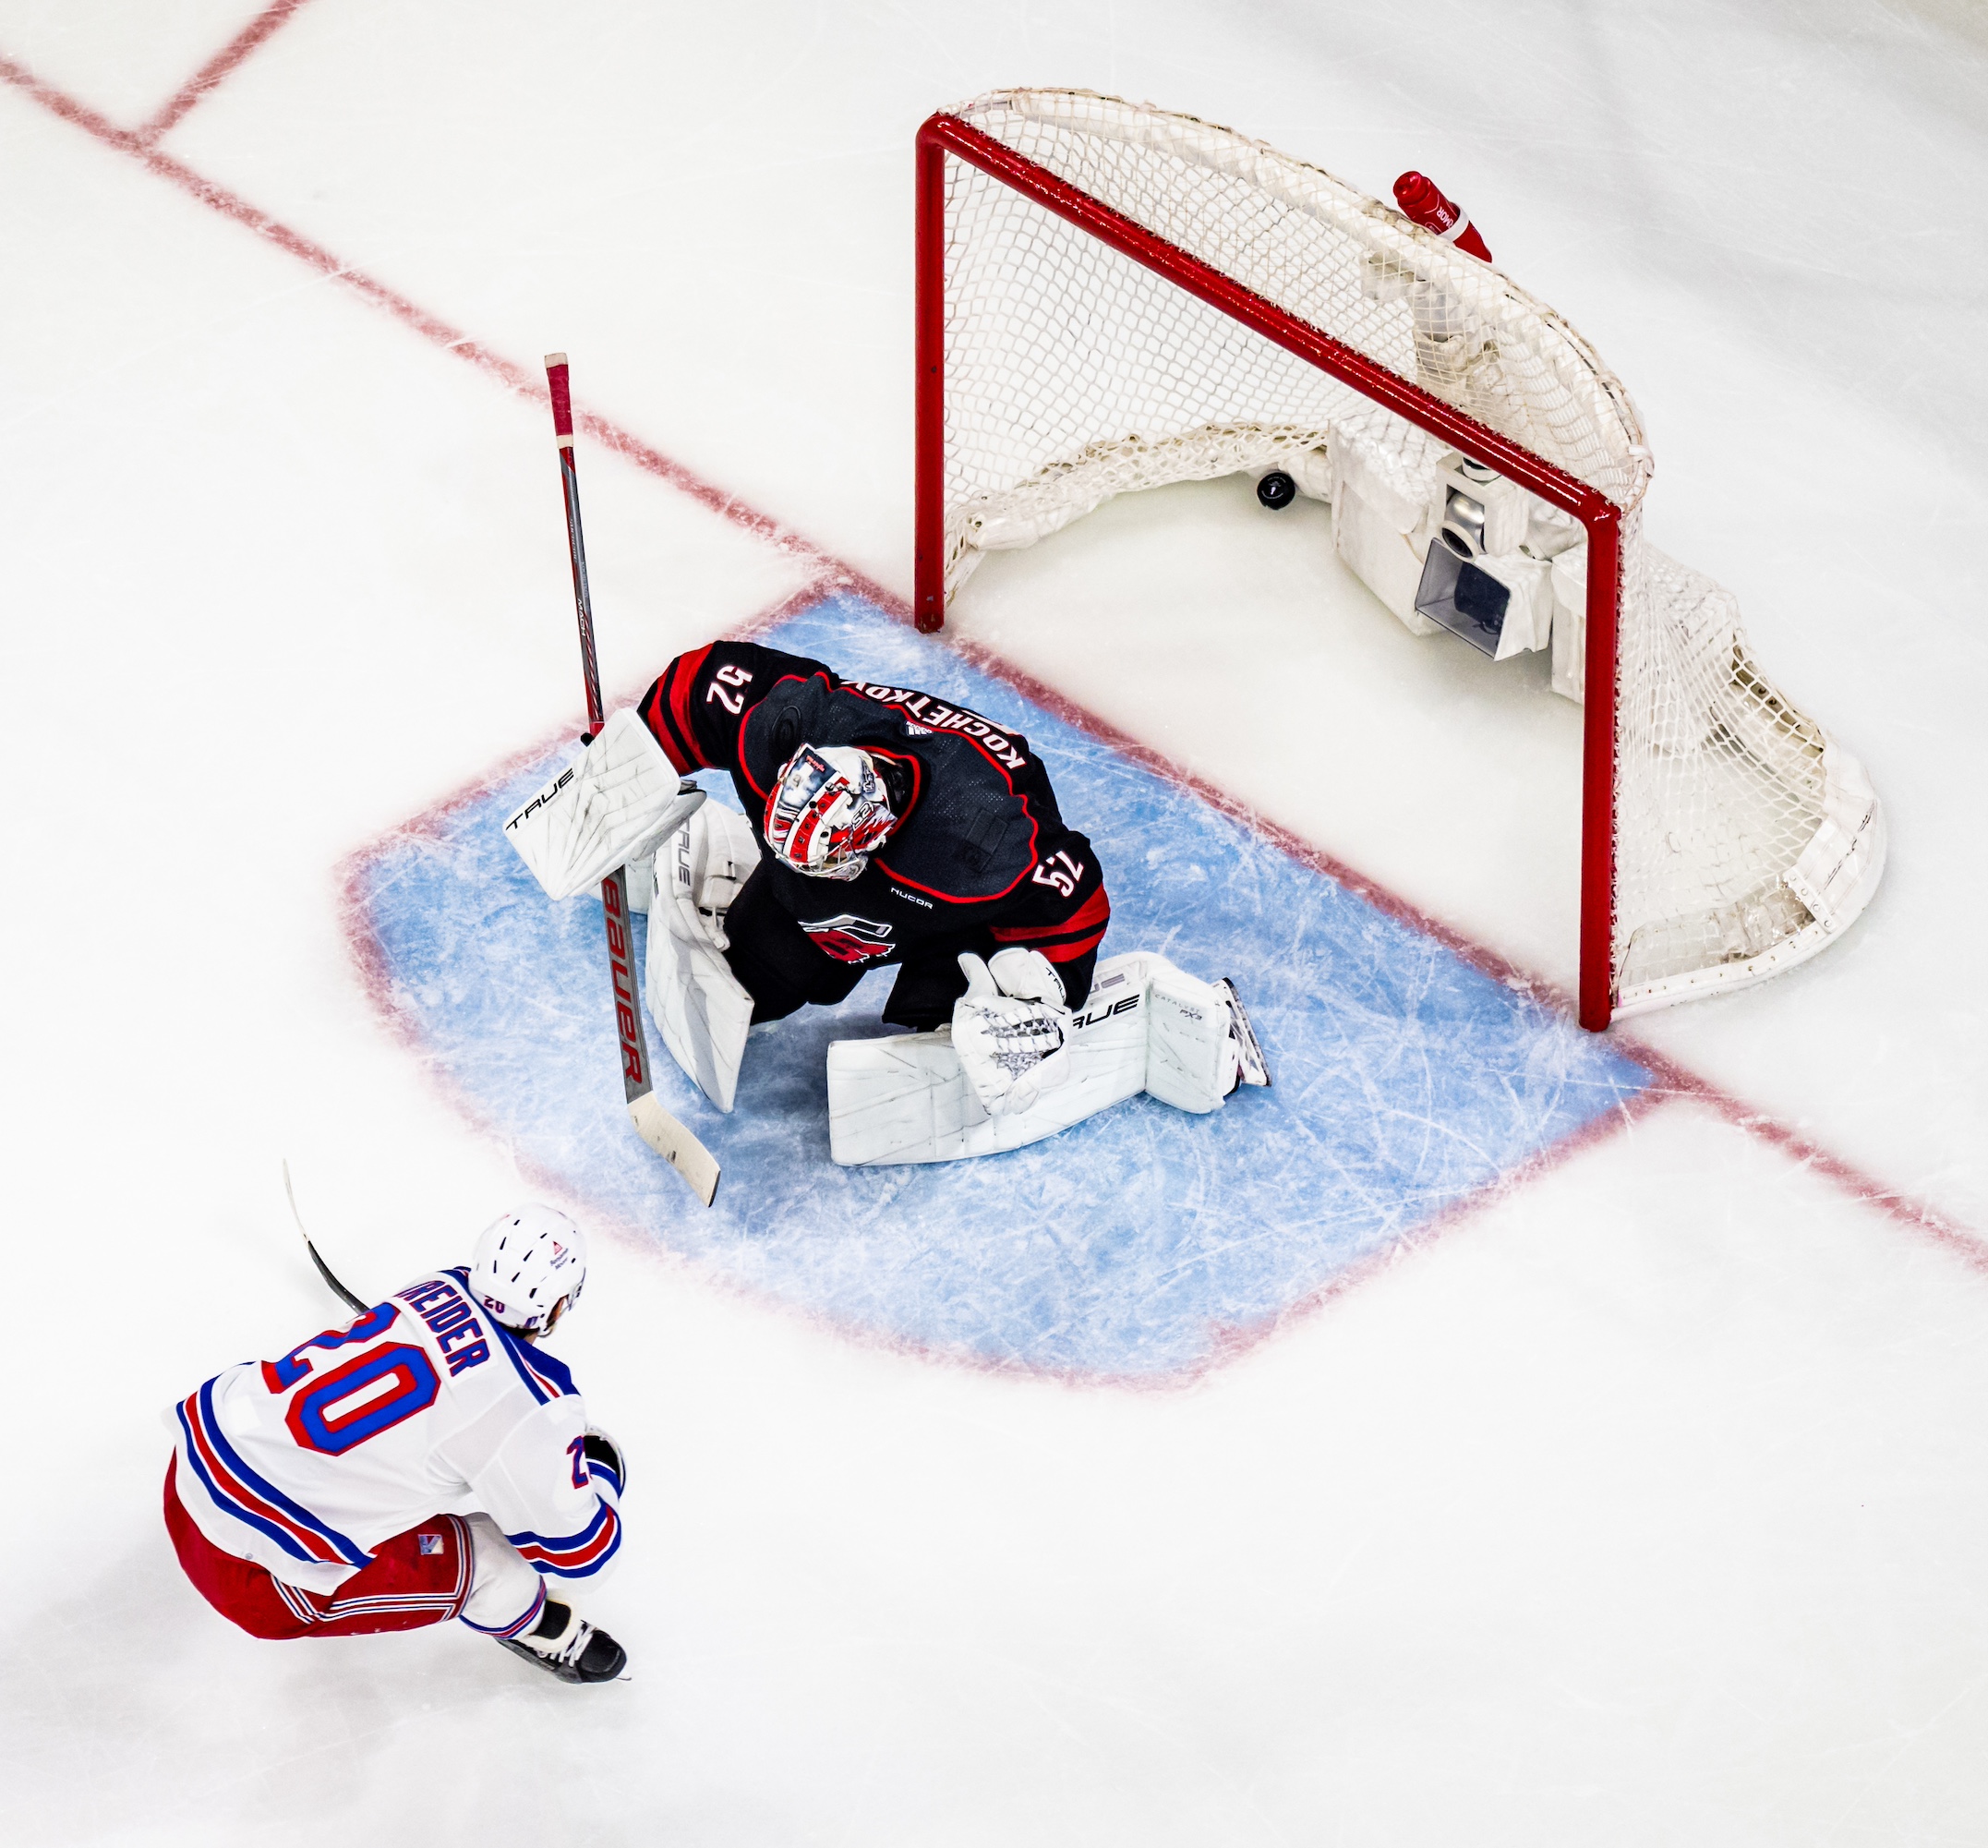 RALEIGH, NORTH CAROLINA - MAY 09: Chris Kreider #20 of the New York Rangers scores a goal against Pyotr Kochetkov #52 of the Carolina Hurricanes during the second period in Game Three of the Second Round of the 2024 Stanley Cup Playoffs at PNC Arena on May 09, 2024 in Raleigh, North Carolina. (Photo by Josh Lavallee/NHLI via Getty Images)